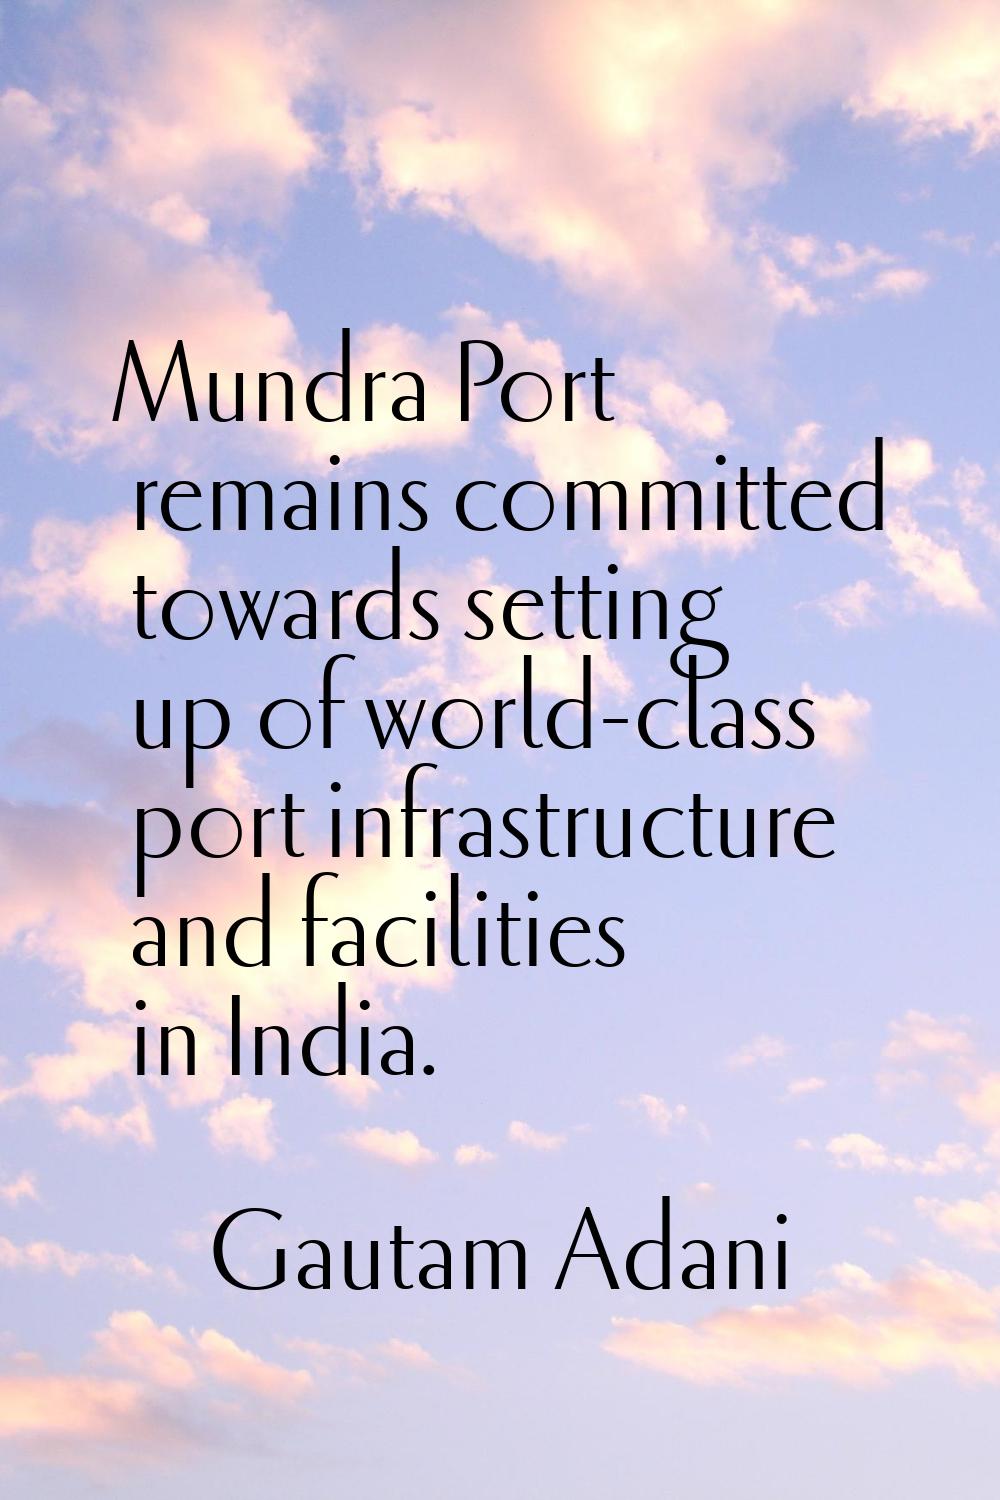 Mundra Port remains committed towards setting up of world-class port infrastructure and facilities 